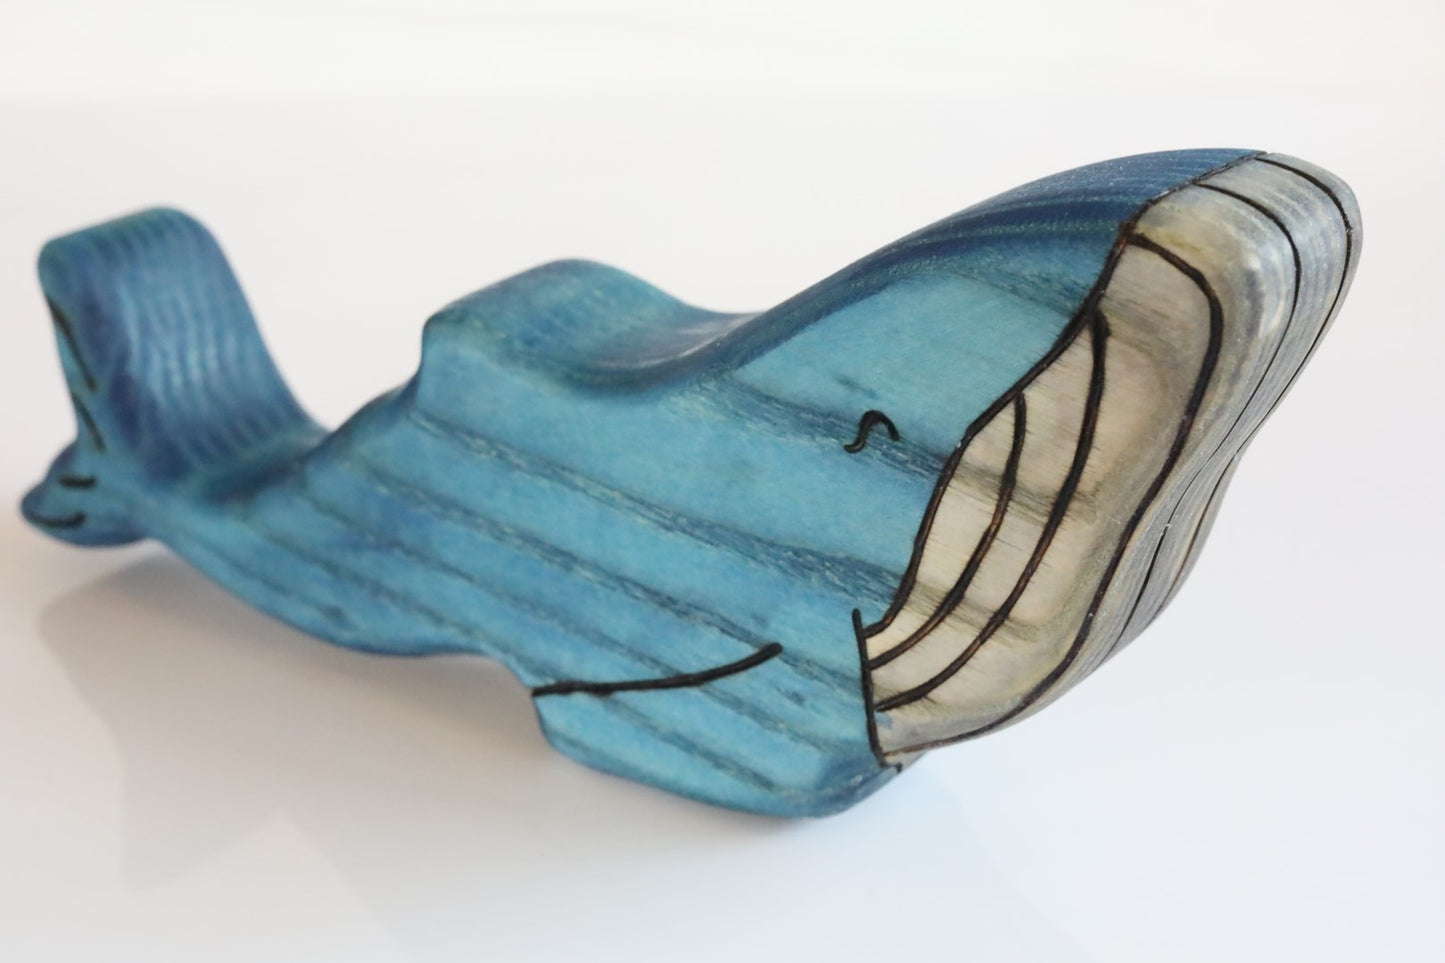 Wooden Humpback Whale Toy